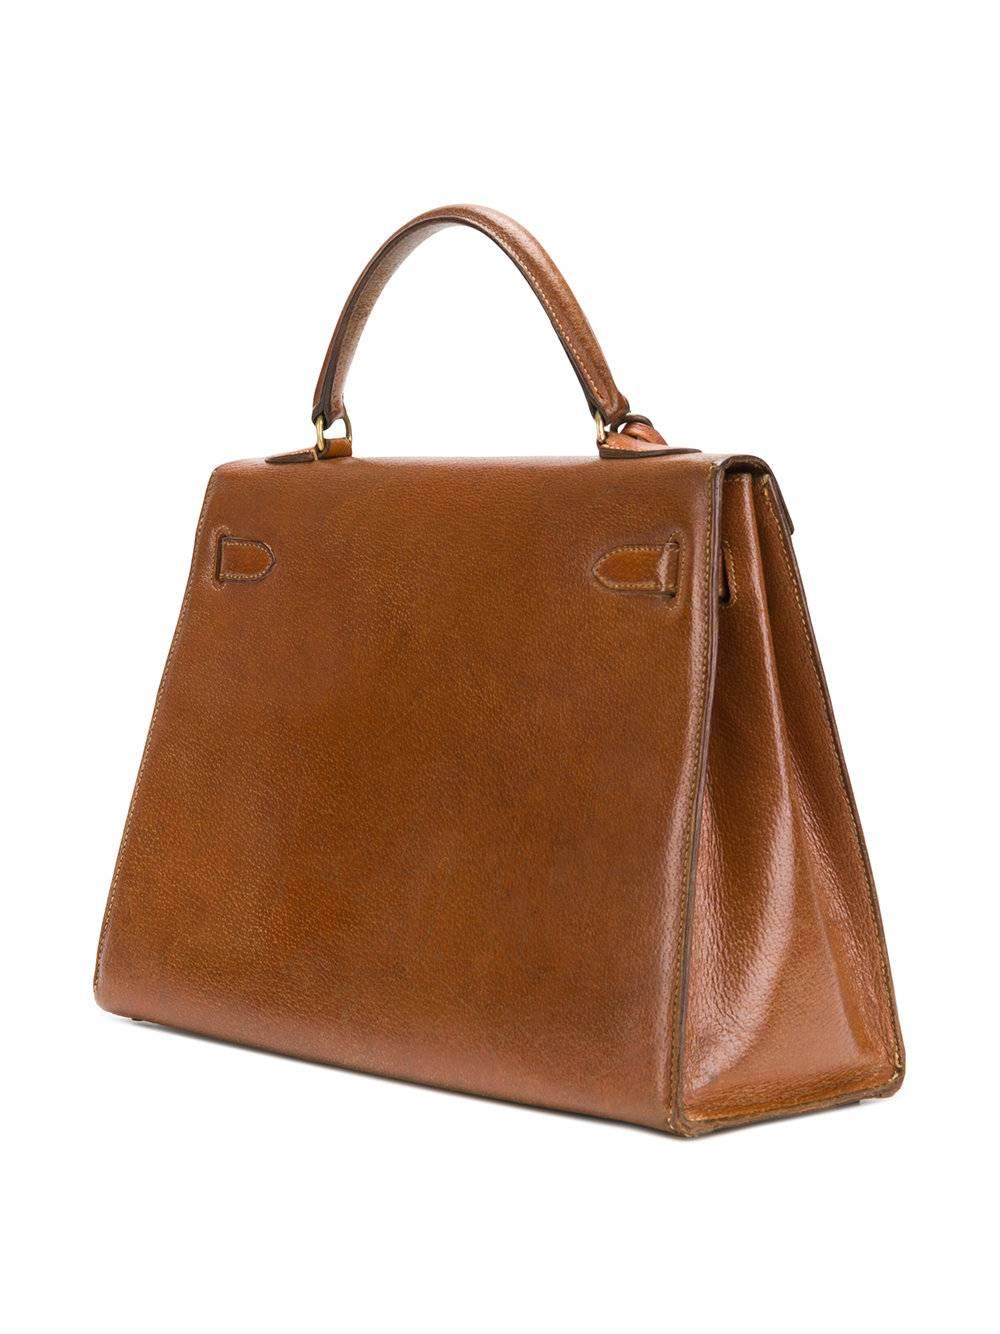 Rare beauty of the 60s, Hermes Kelly handbag made of Pecari leather, gold hardware. Gorgeous gold leather color, exceptional and strong quality of leather. It can last forever !

Marked: Hermès Paris
Size: 32 cm
Excellent vintage condition